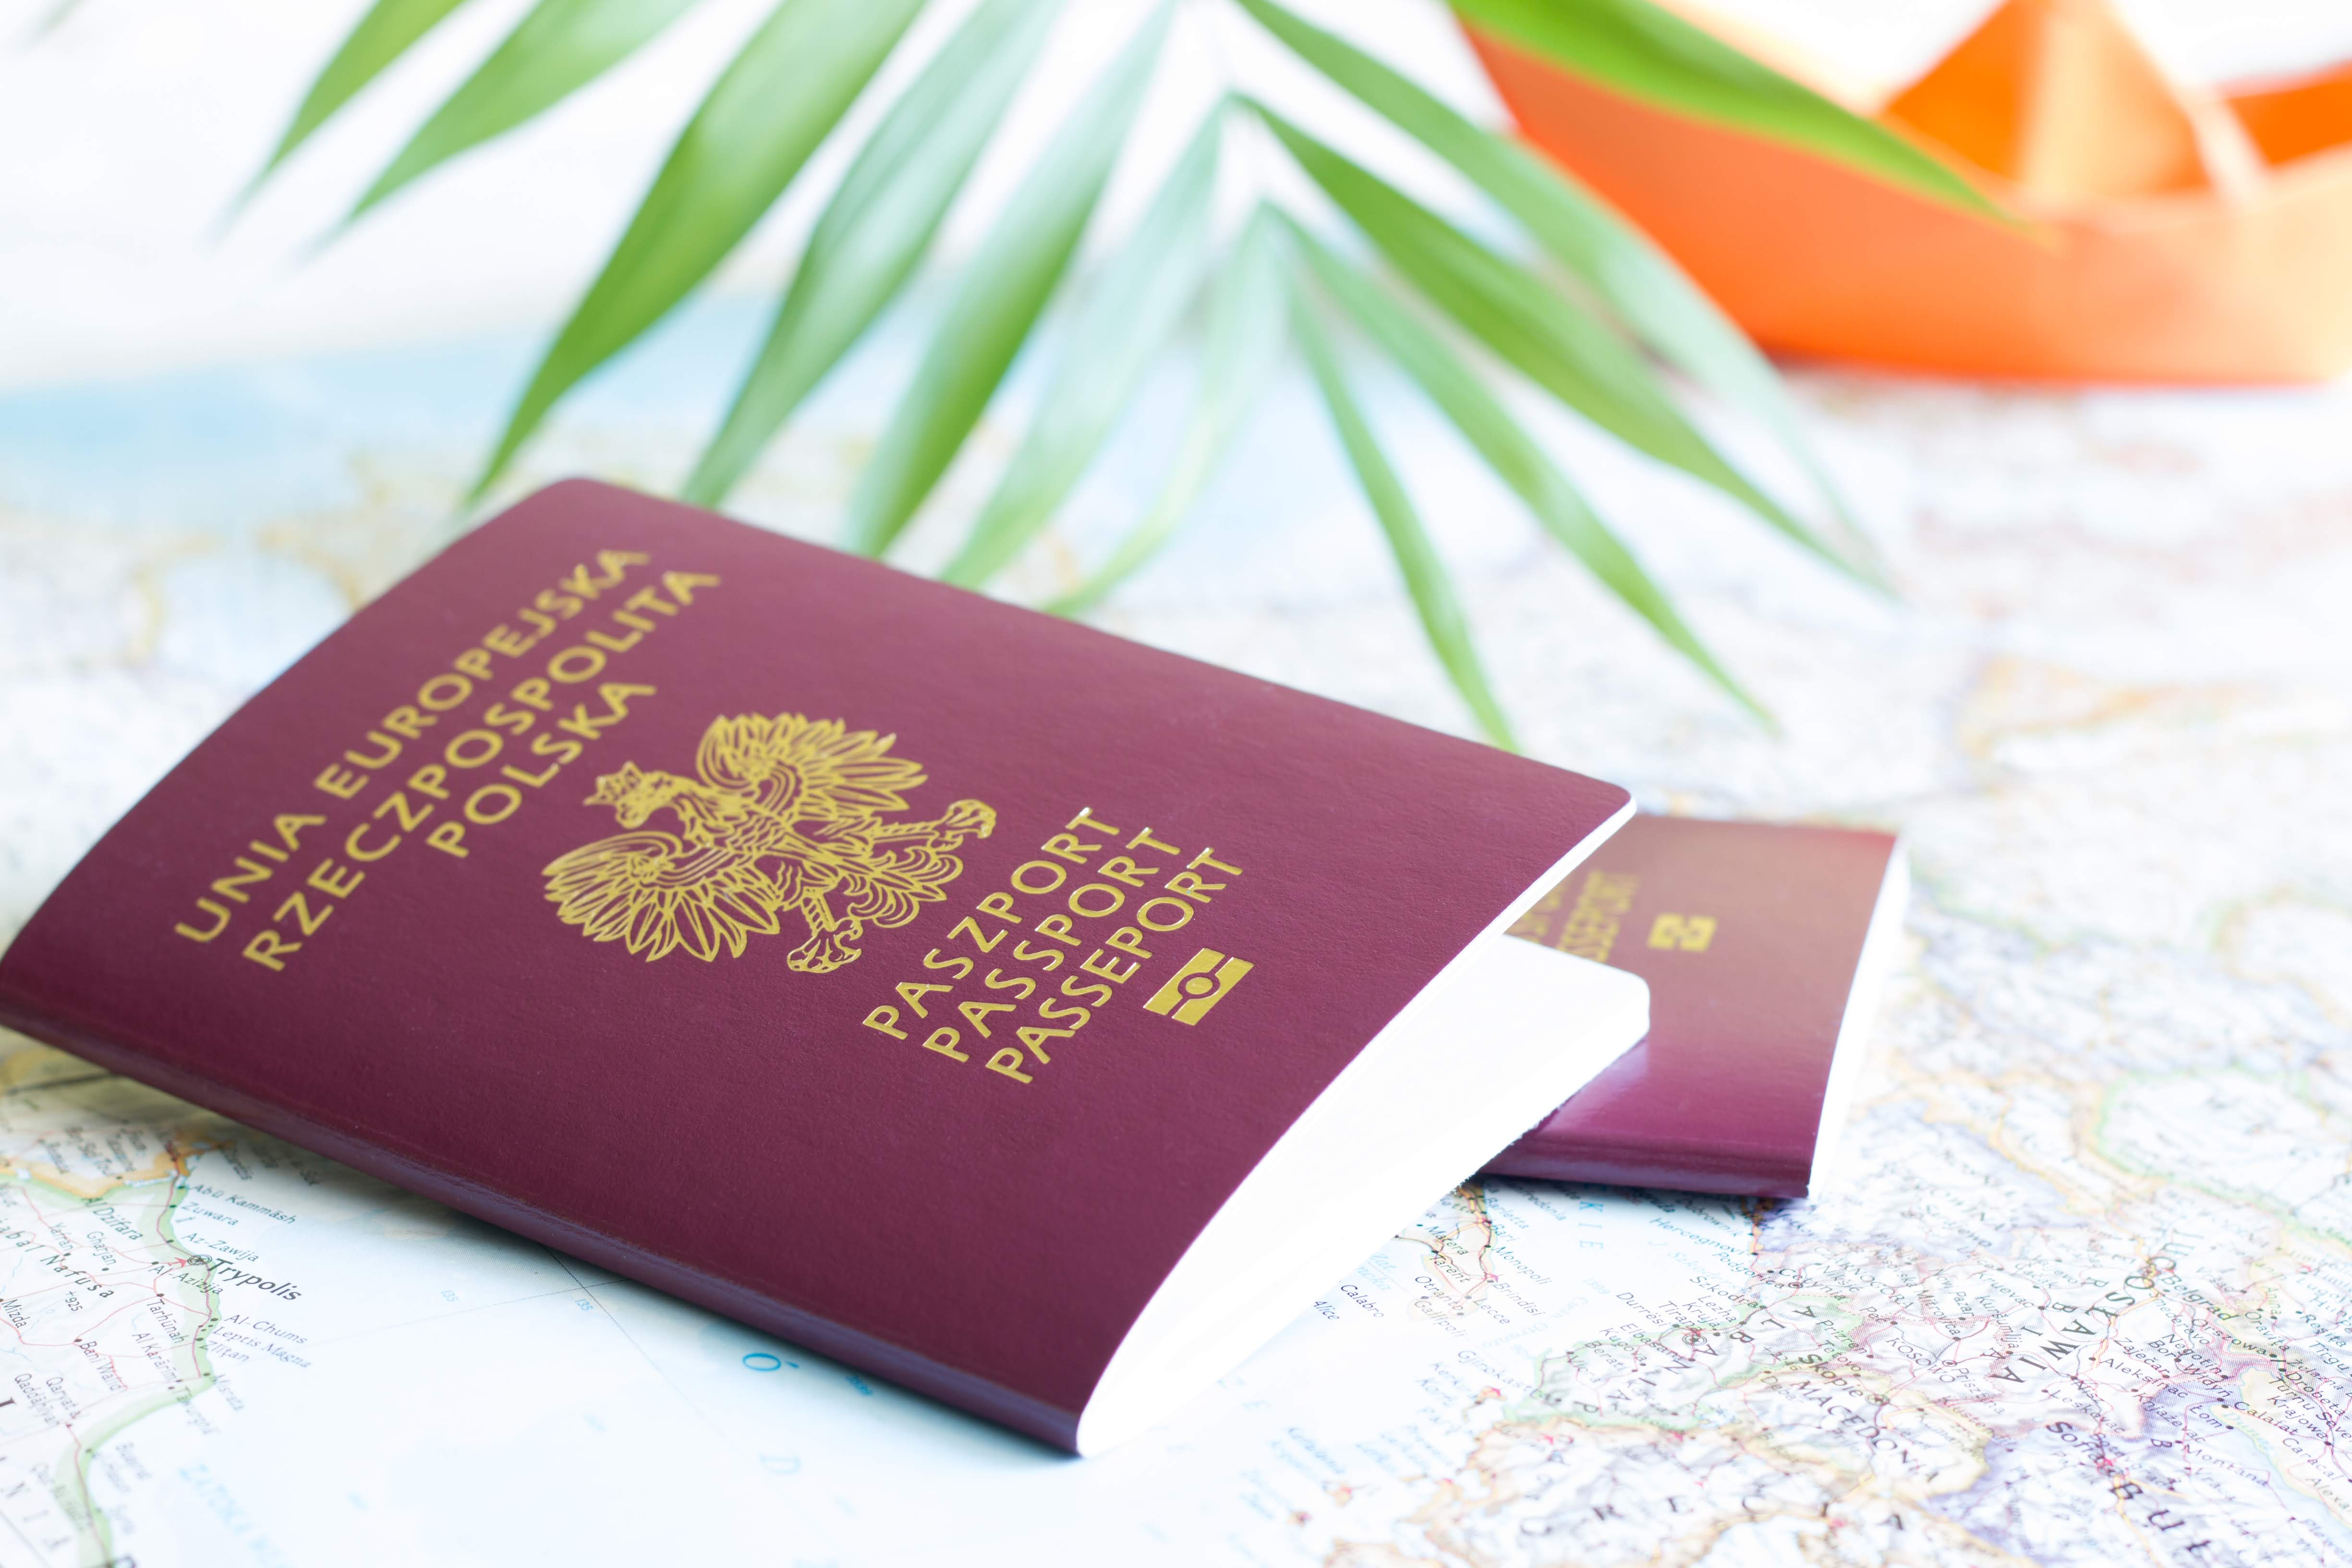 Are Poland Passport Exempted From Vietnam Visa 2024? Options for Polish Citizens Seeking to Apply for Vietnam Visa Online